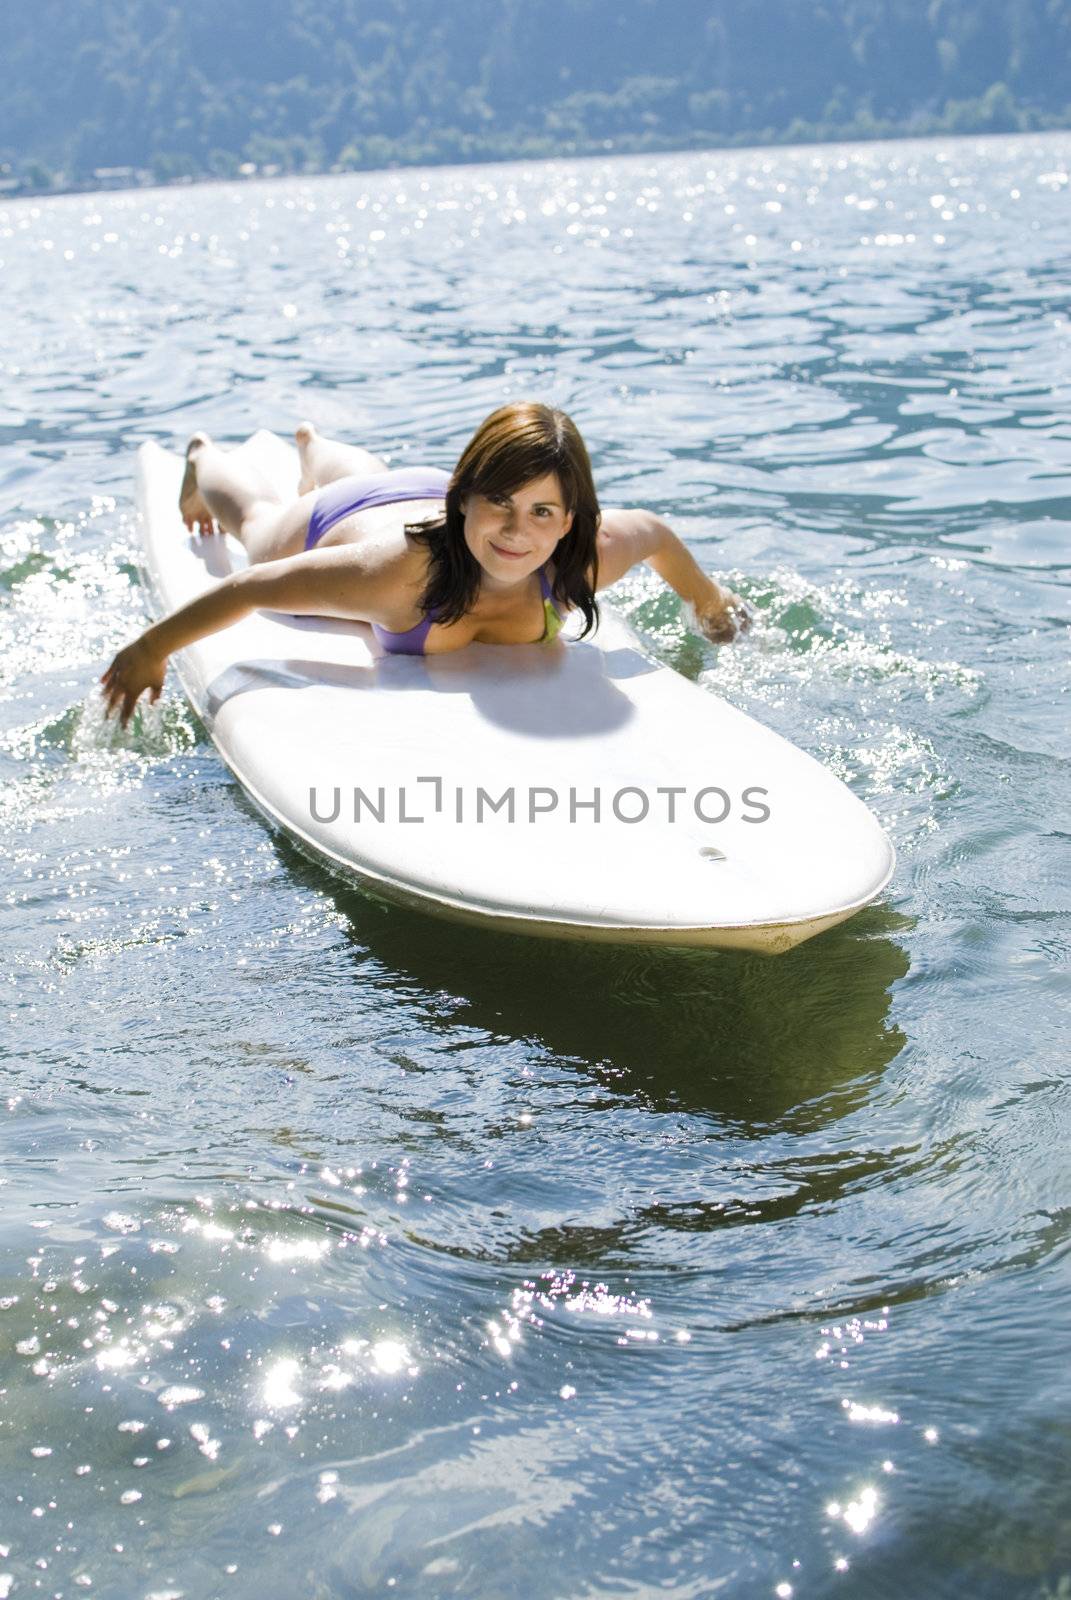 Girl relaxing on surfboard by fahrner